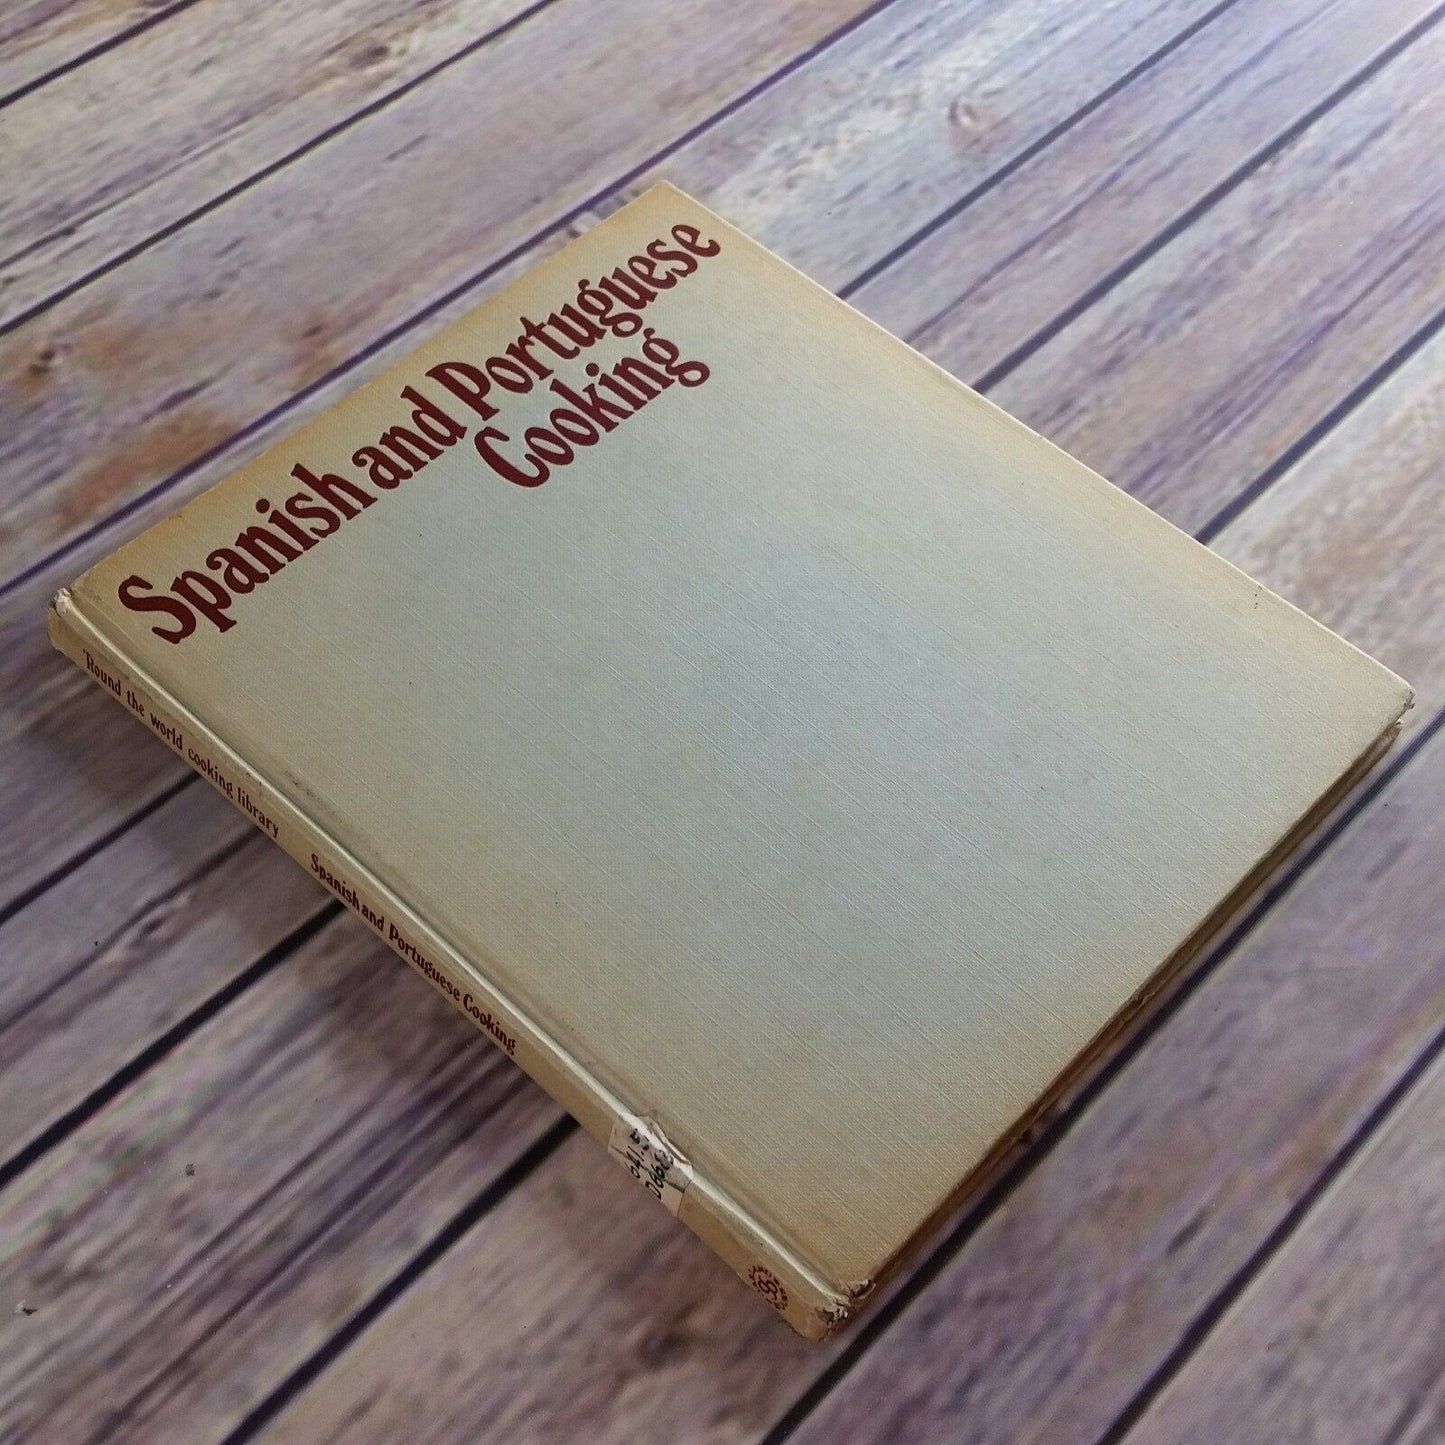 Vtg Spanish and Portuguese Cookbook Cooking Recipes 1973 Hardcover NO Dust Jacket Round The World Cooking Library Iberian Peninsula